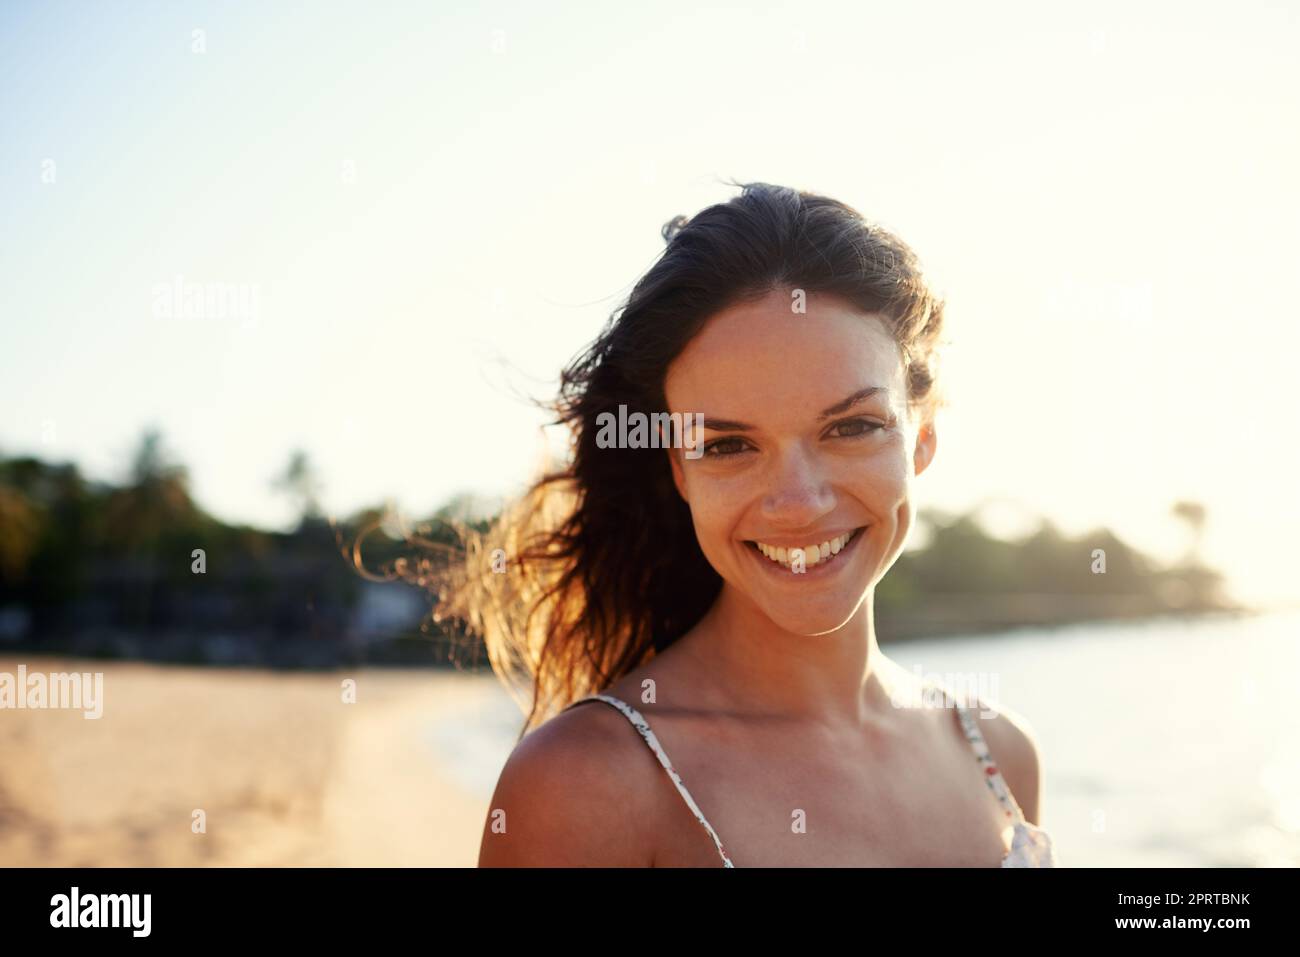 My happy place. Portrait of a beautiful young woman on the beach. Stock Photo